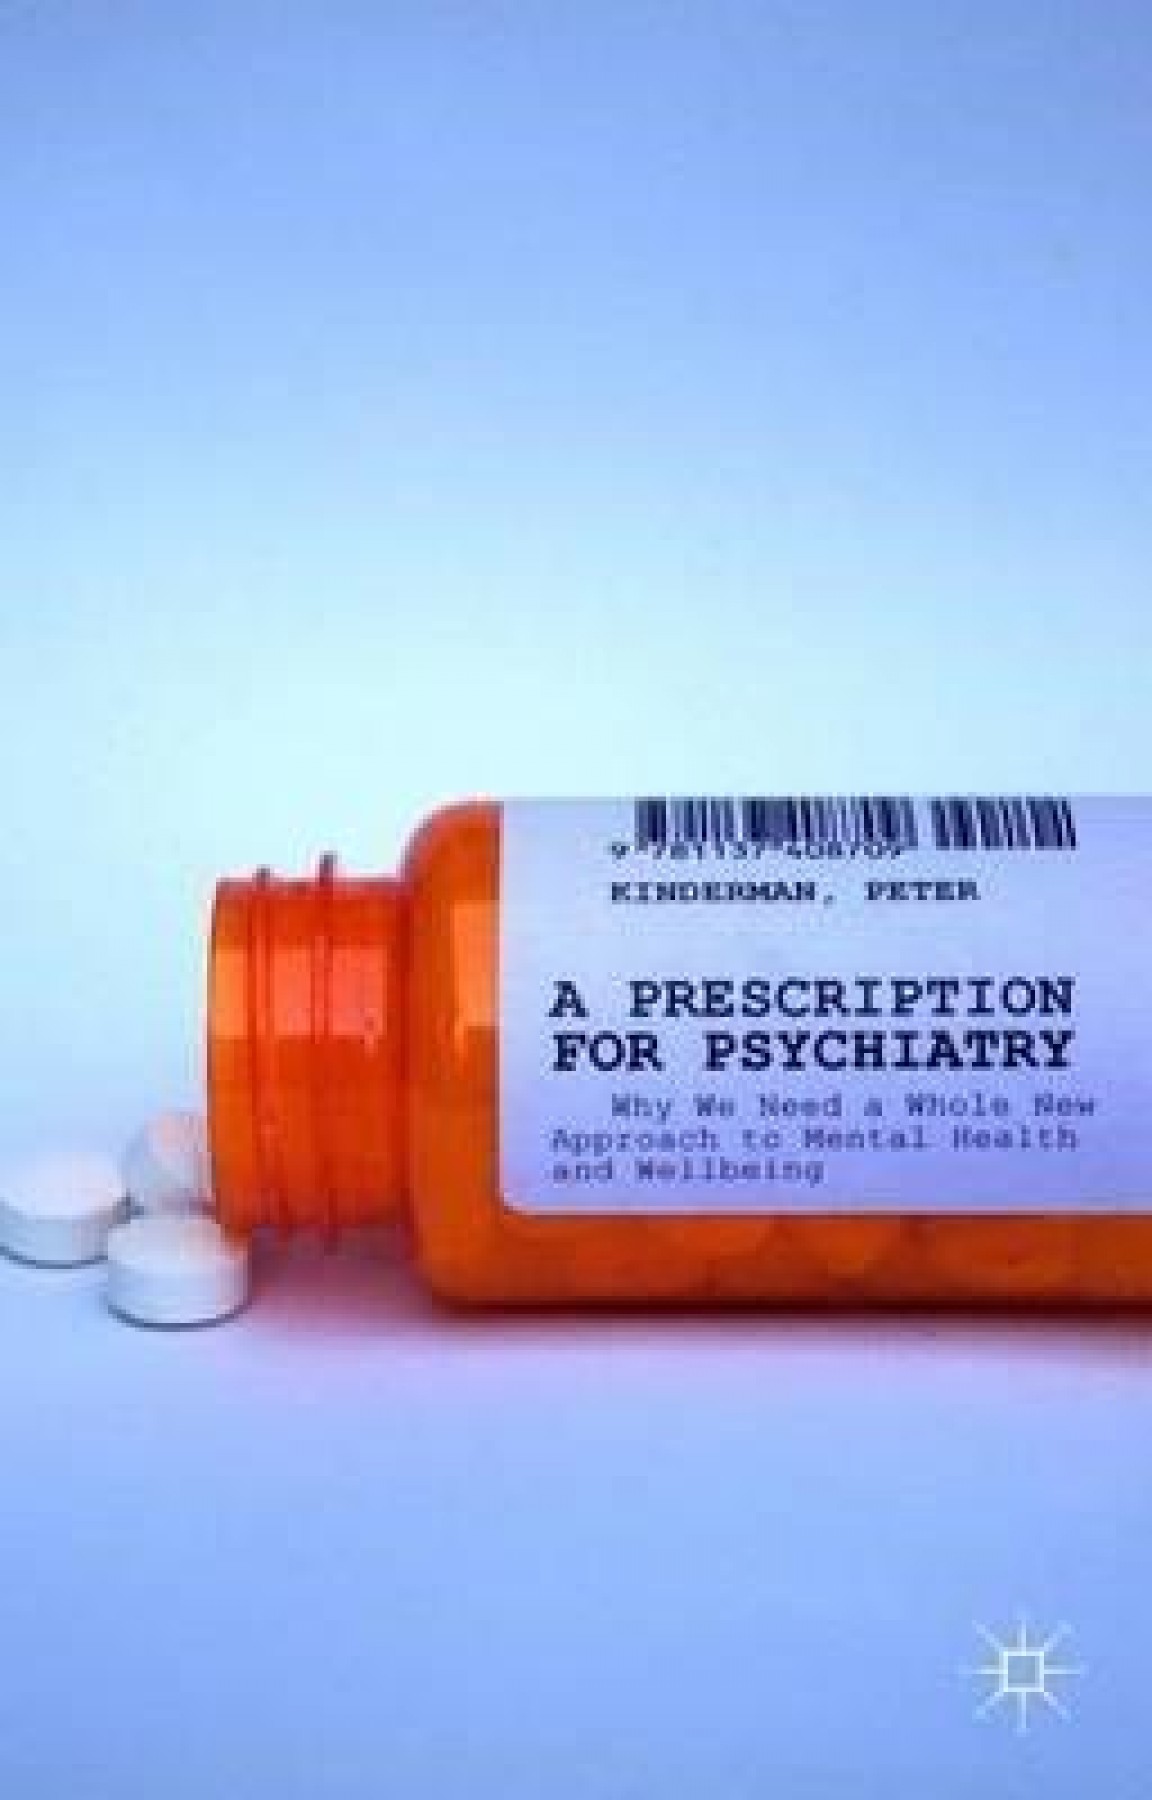 A prescription for psychiatry: Why we need a whole new approach to mental health and wellbeing